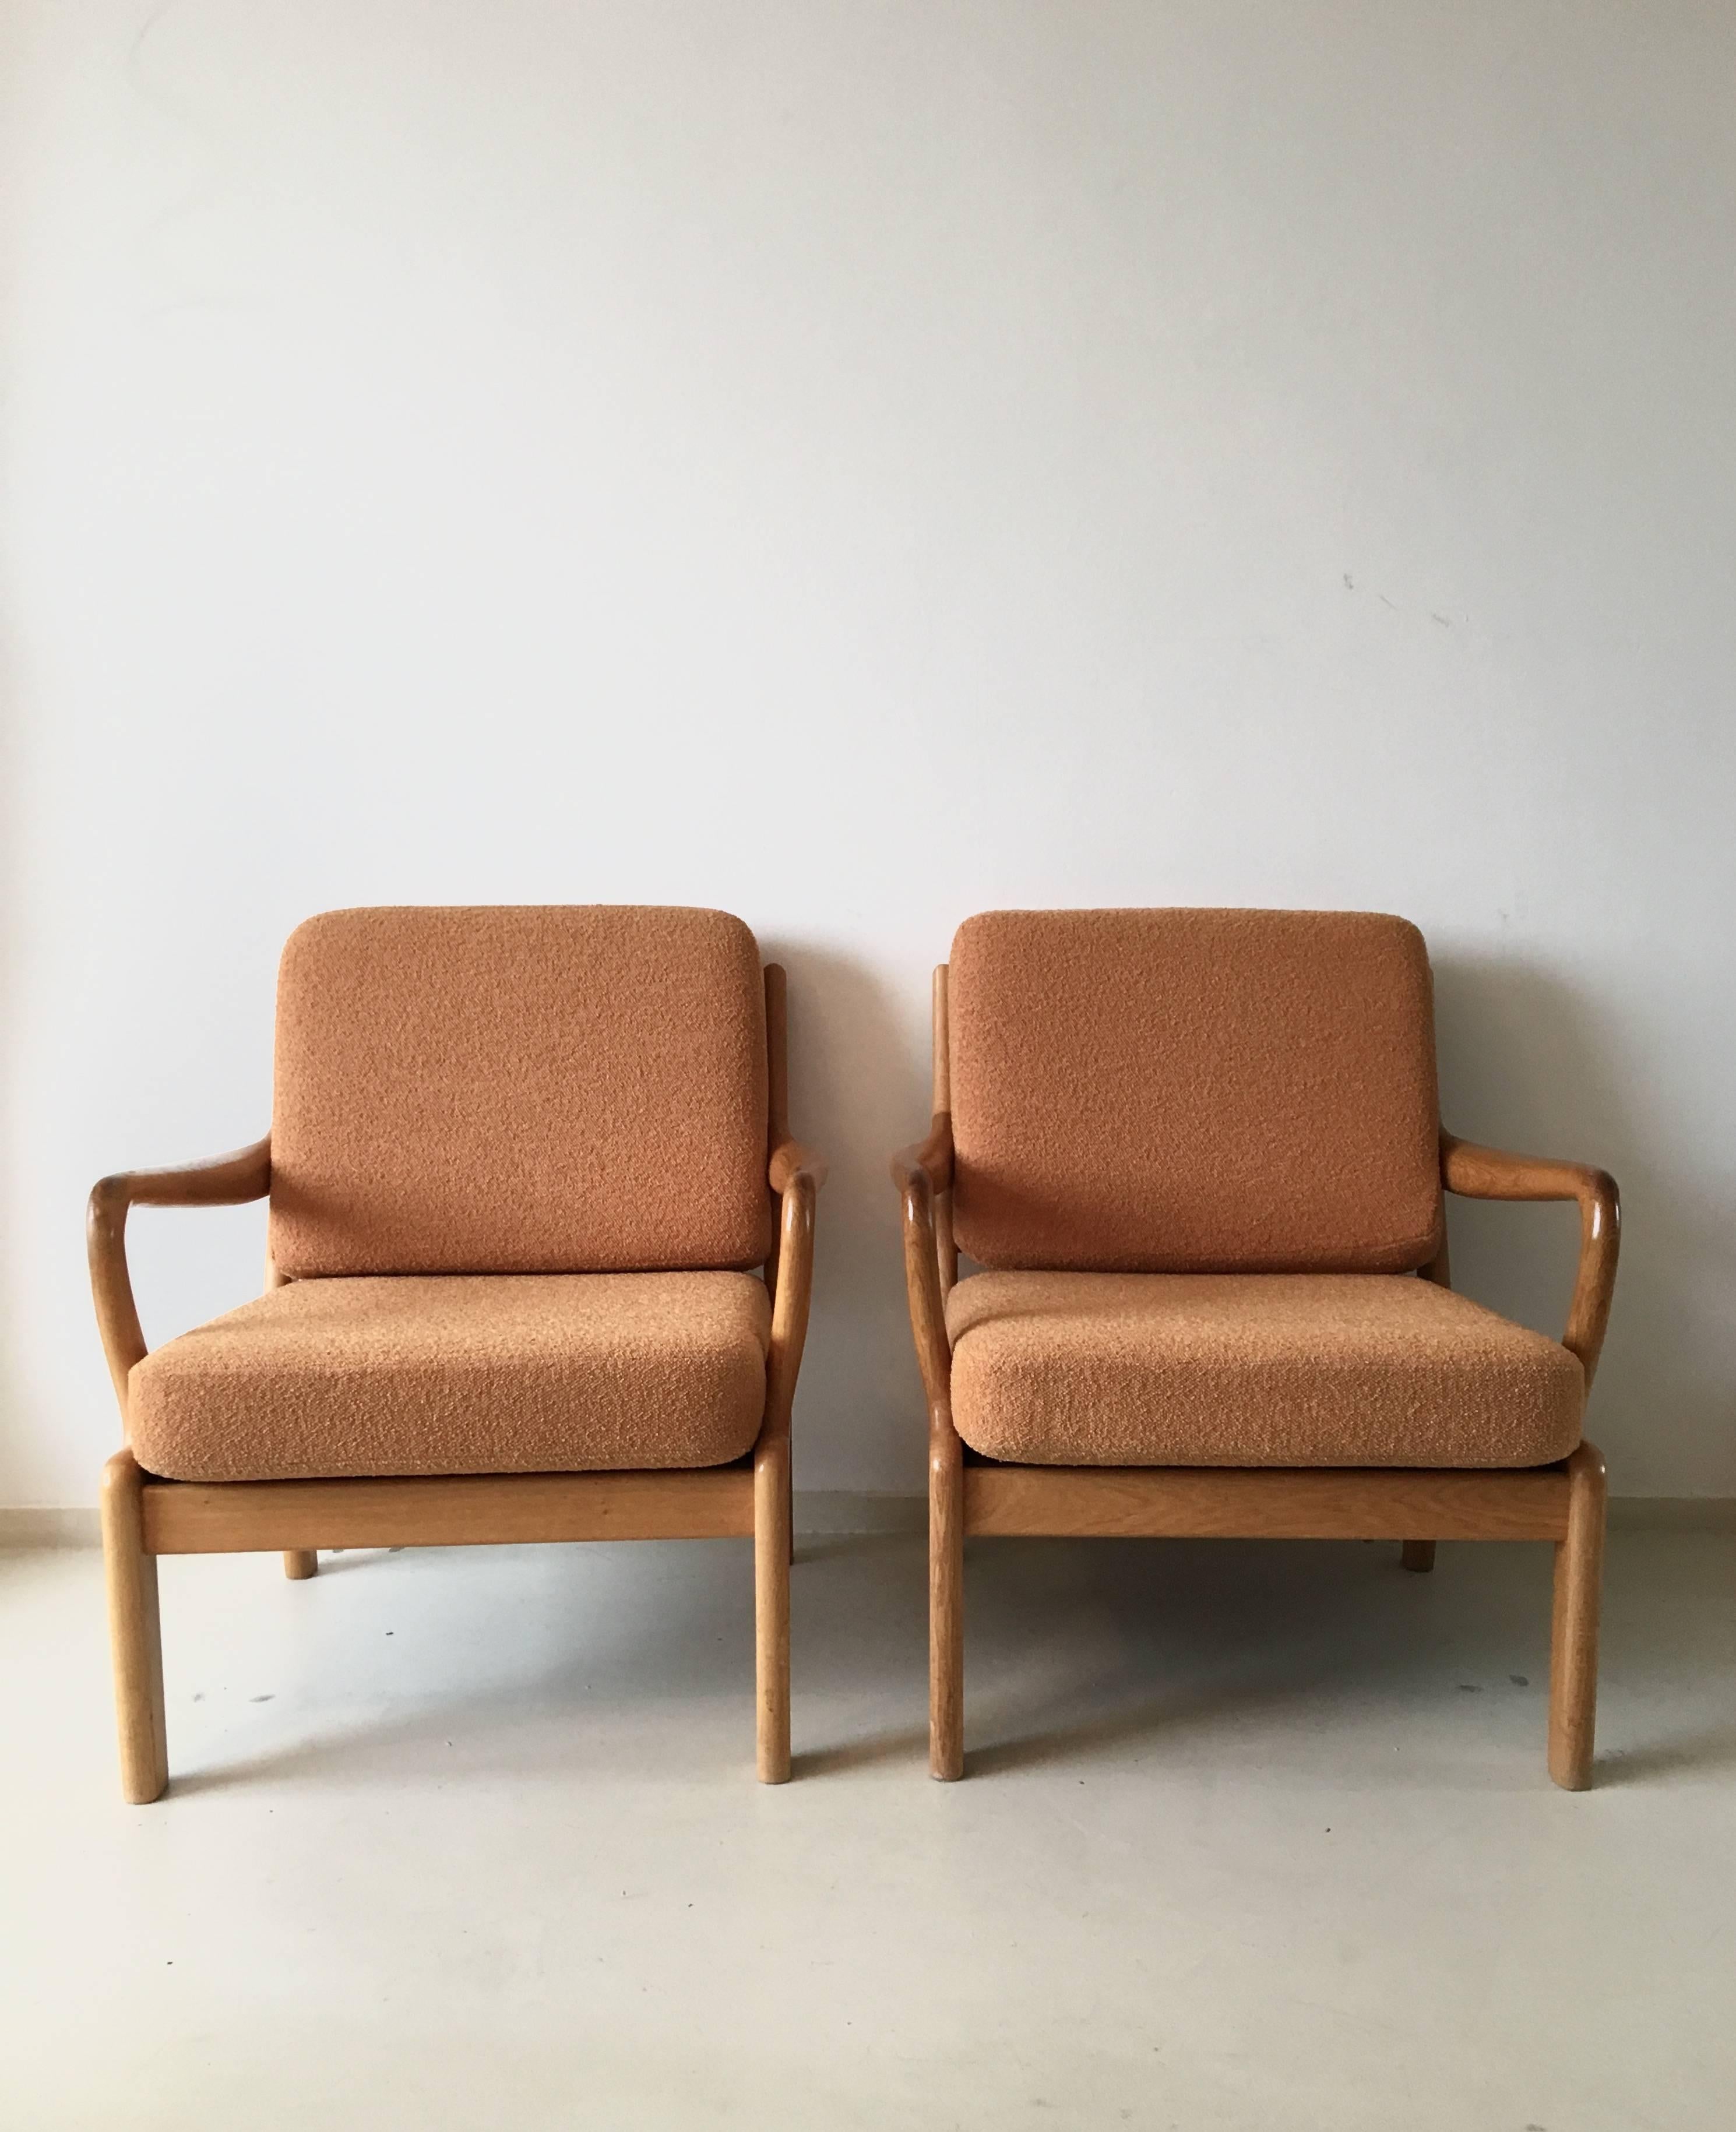 This set of Danish chairs come with frames constructed out of solid teakwood, with sculpted armrests and orange textured fabric which is in a very good condition. Classic and timeless high quality design.

Marked, made in Denmark, member of the